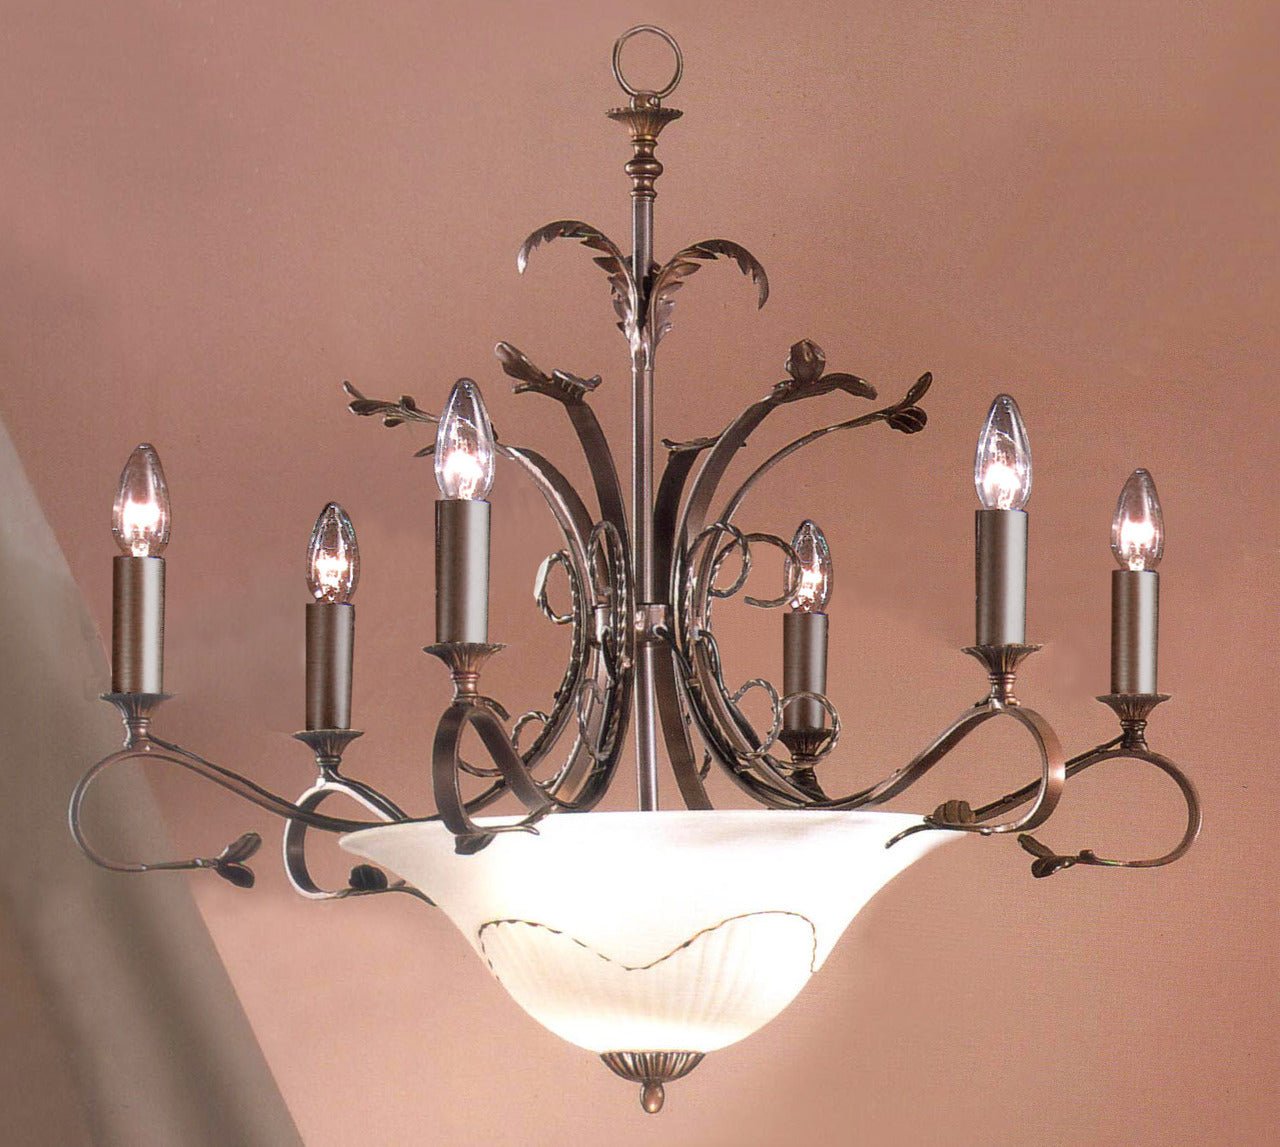 Classic Lighting 4118 BZ Treviso Wrought Iron Chandelier in Bronze (Imported from Italy)